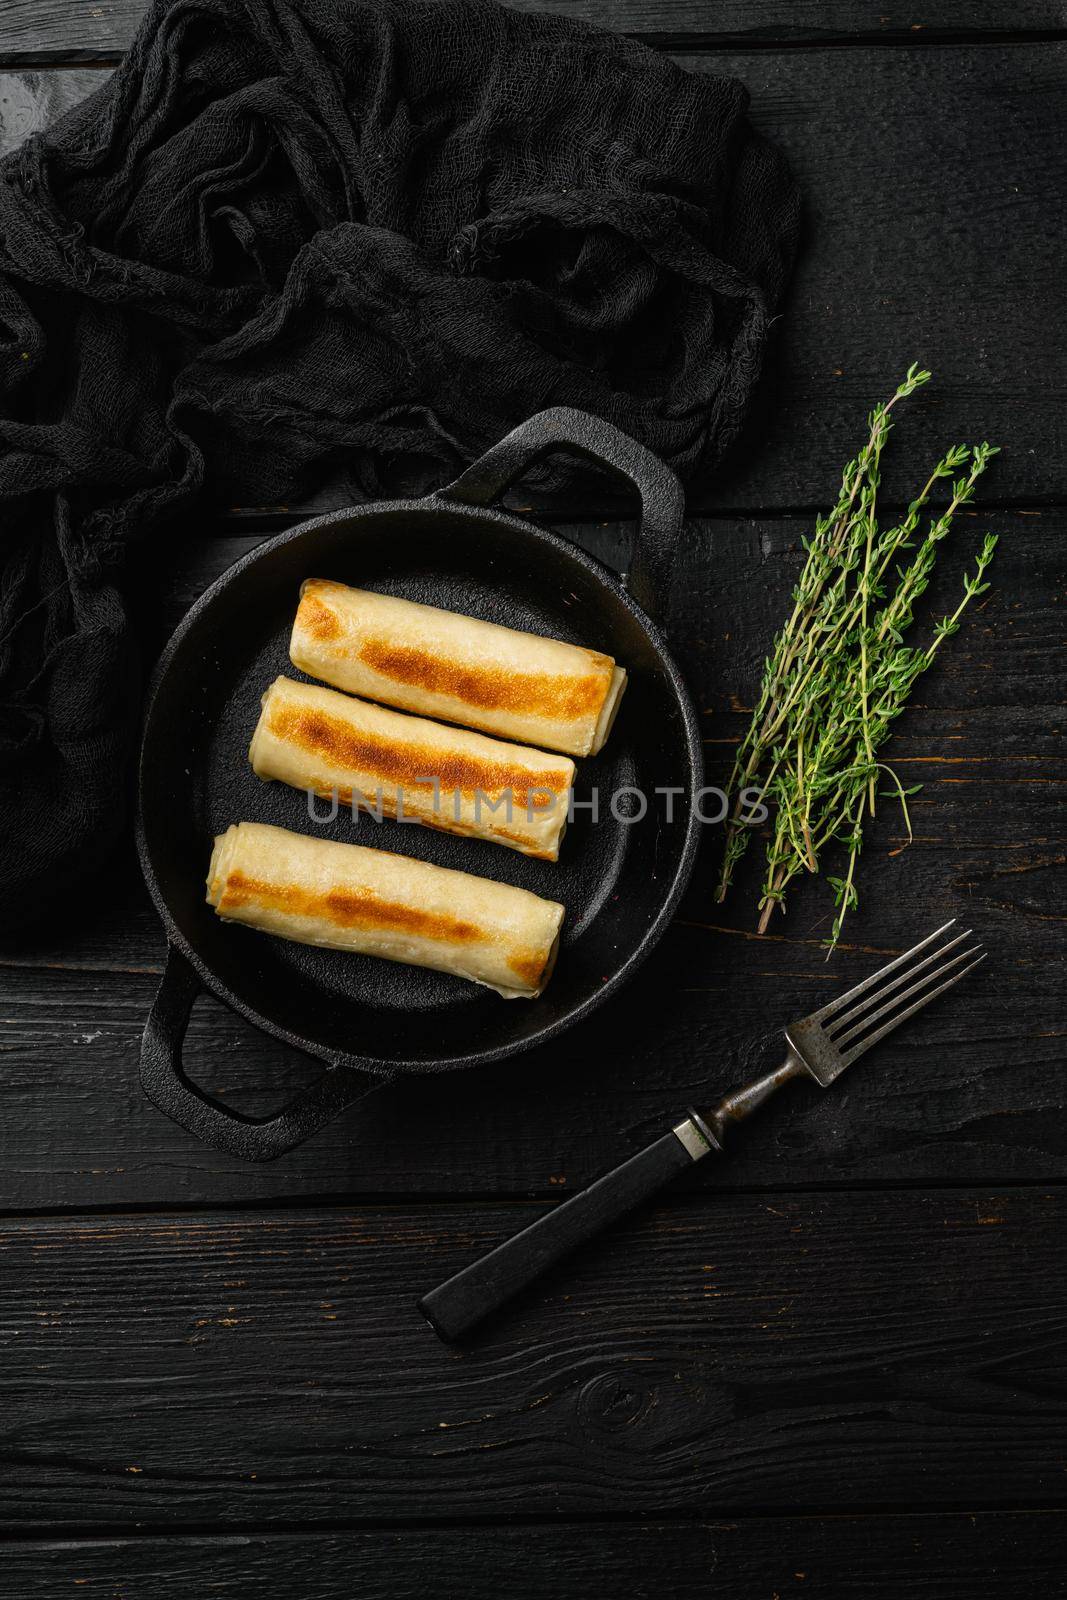 Georgian crepes stuffed on black wooden table background, top view flat lay, with copy space for text by Ilianesolenyi